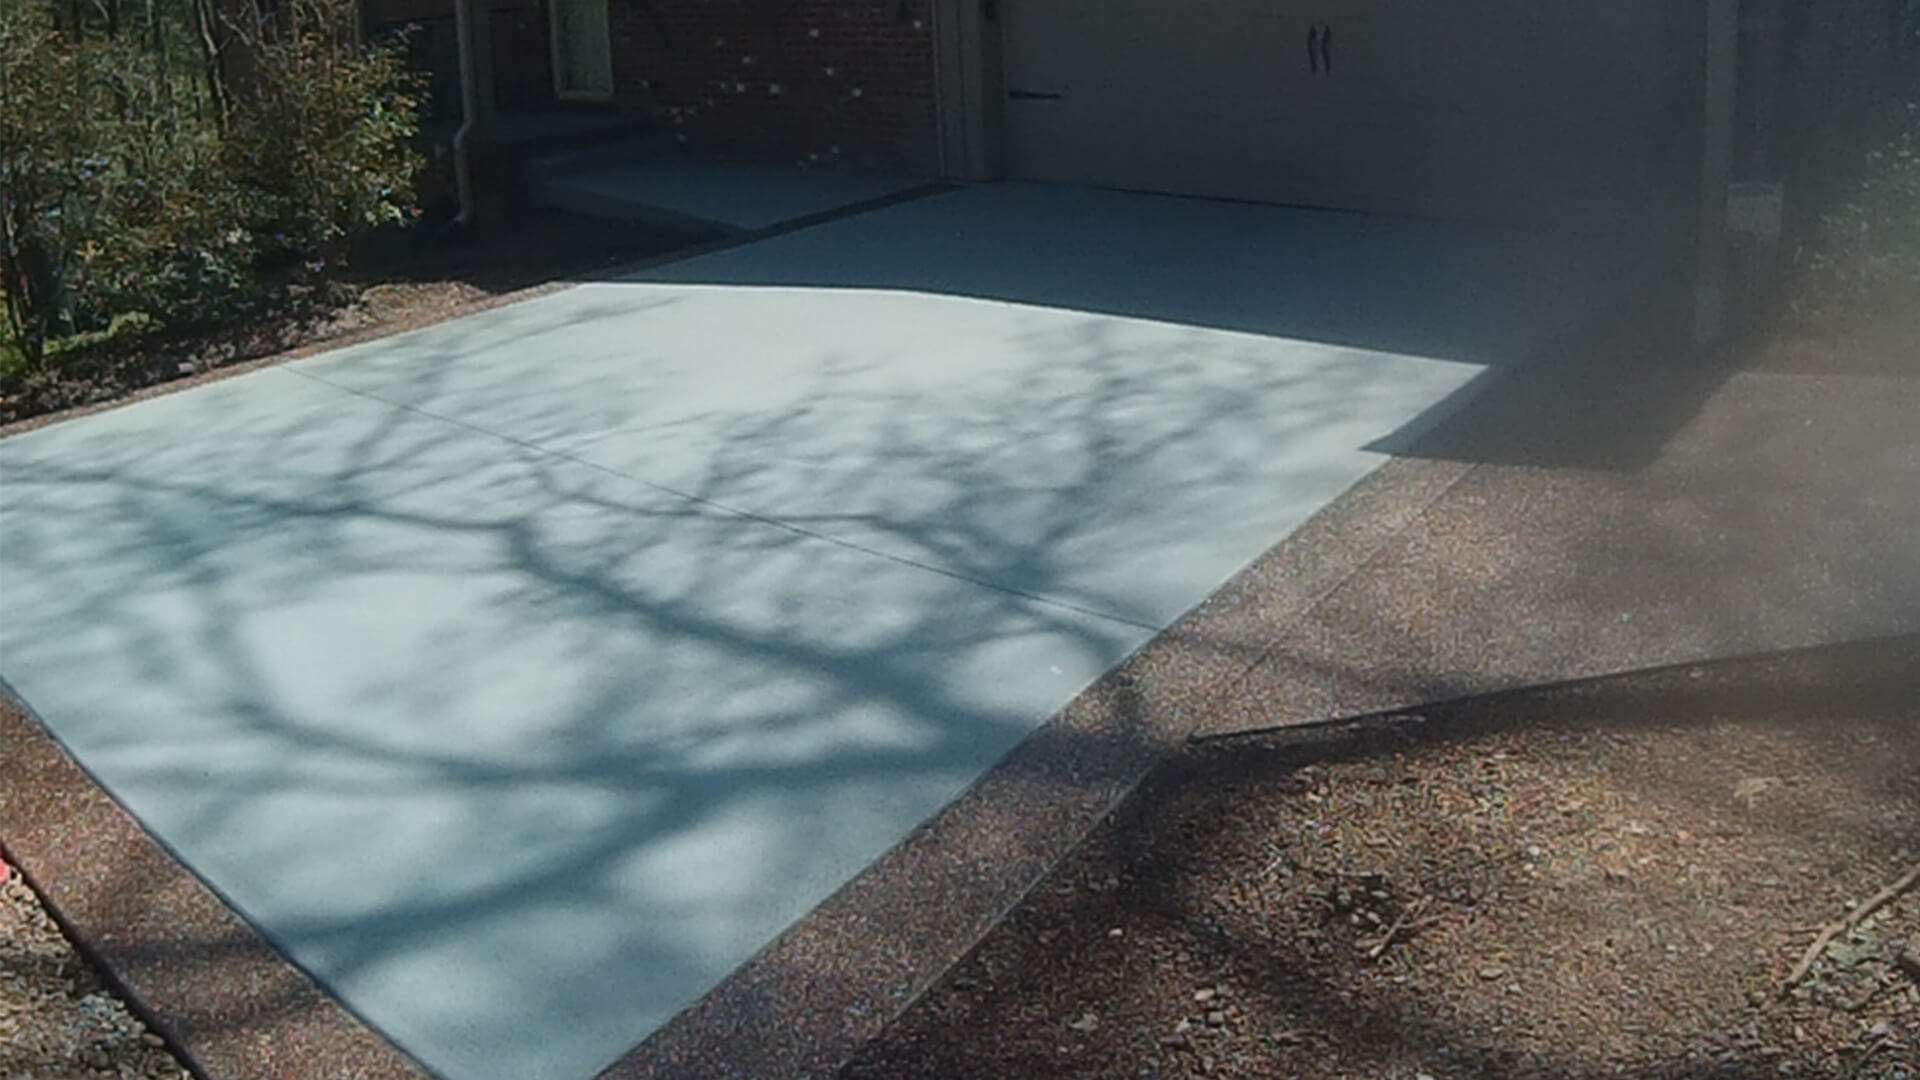 Brentwood Concrete LLC: Concrete Contractor, Concrete Company and Concrete Driveway Repair Services in Brentwood, Franklin and Belle Meade